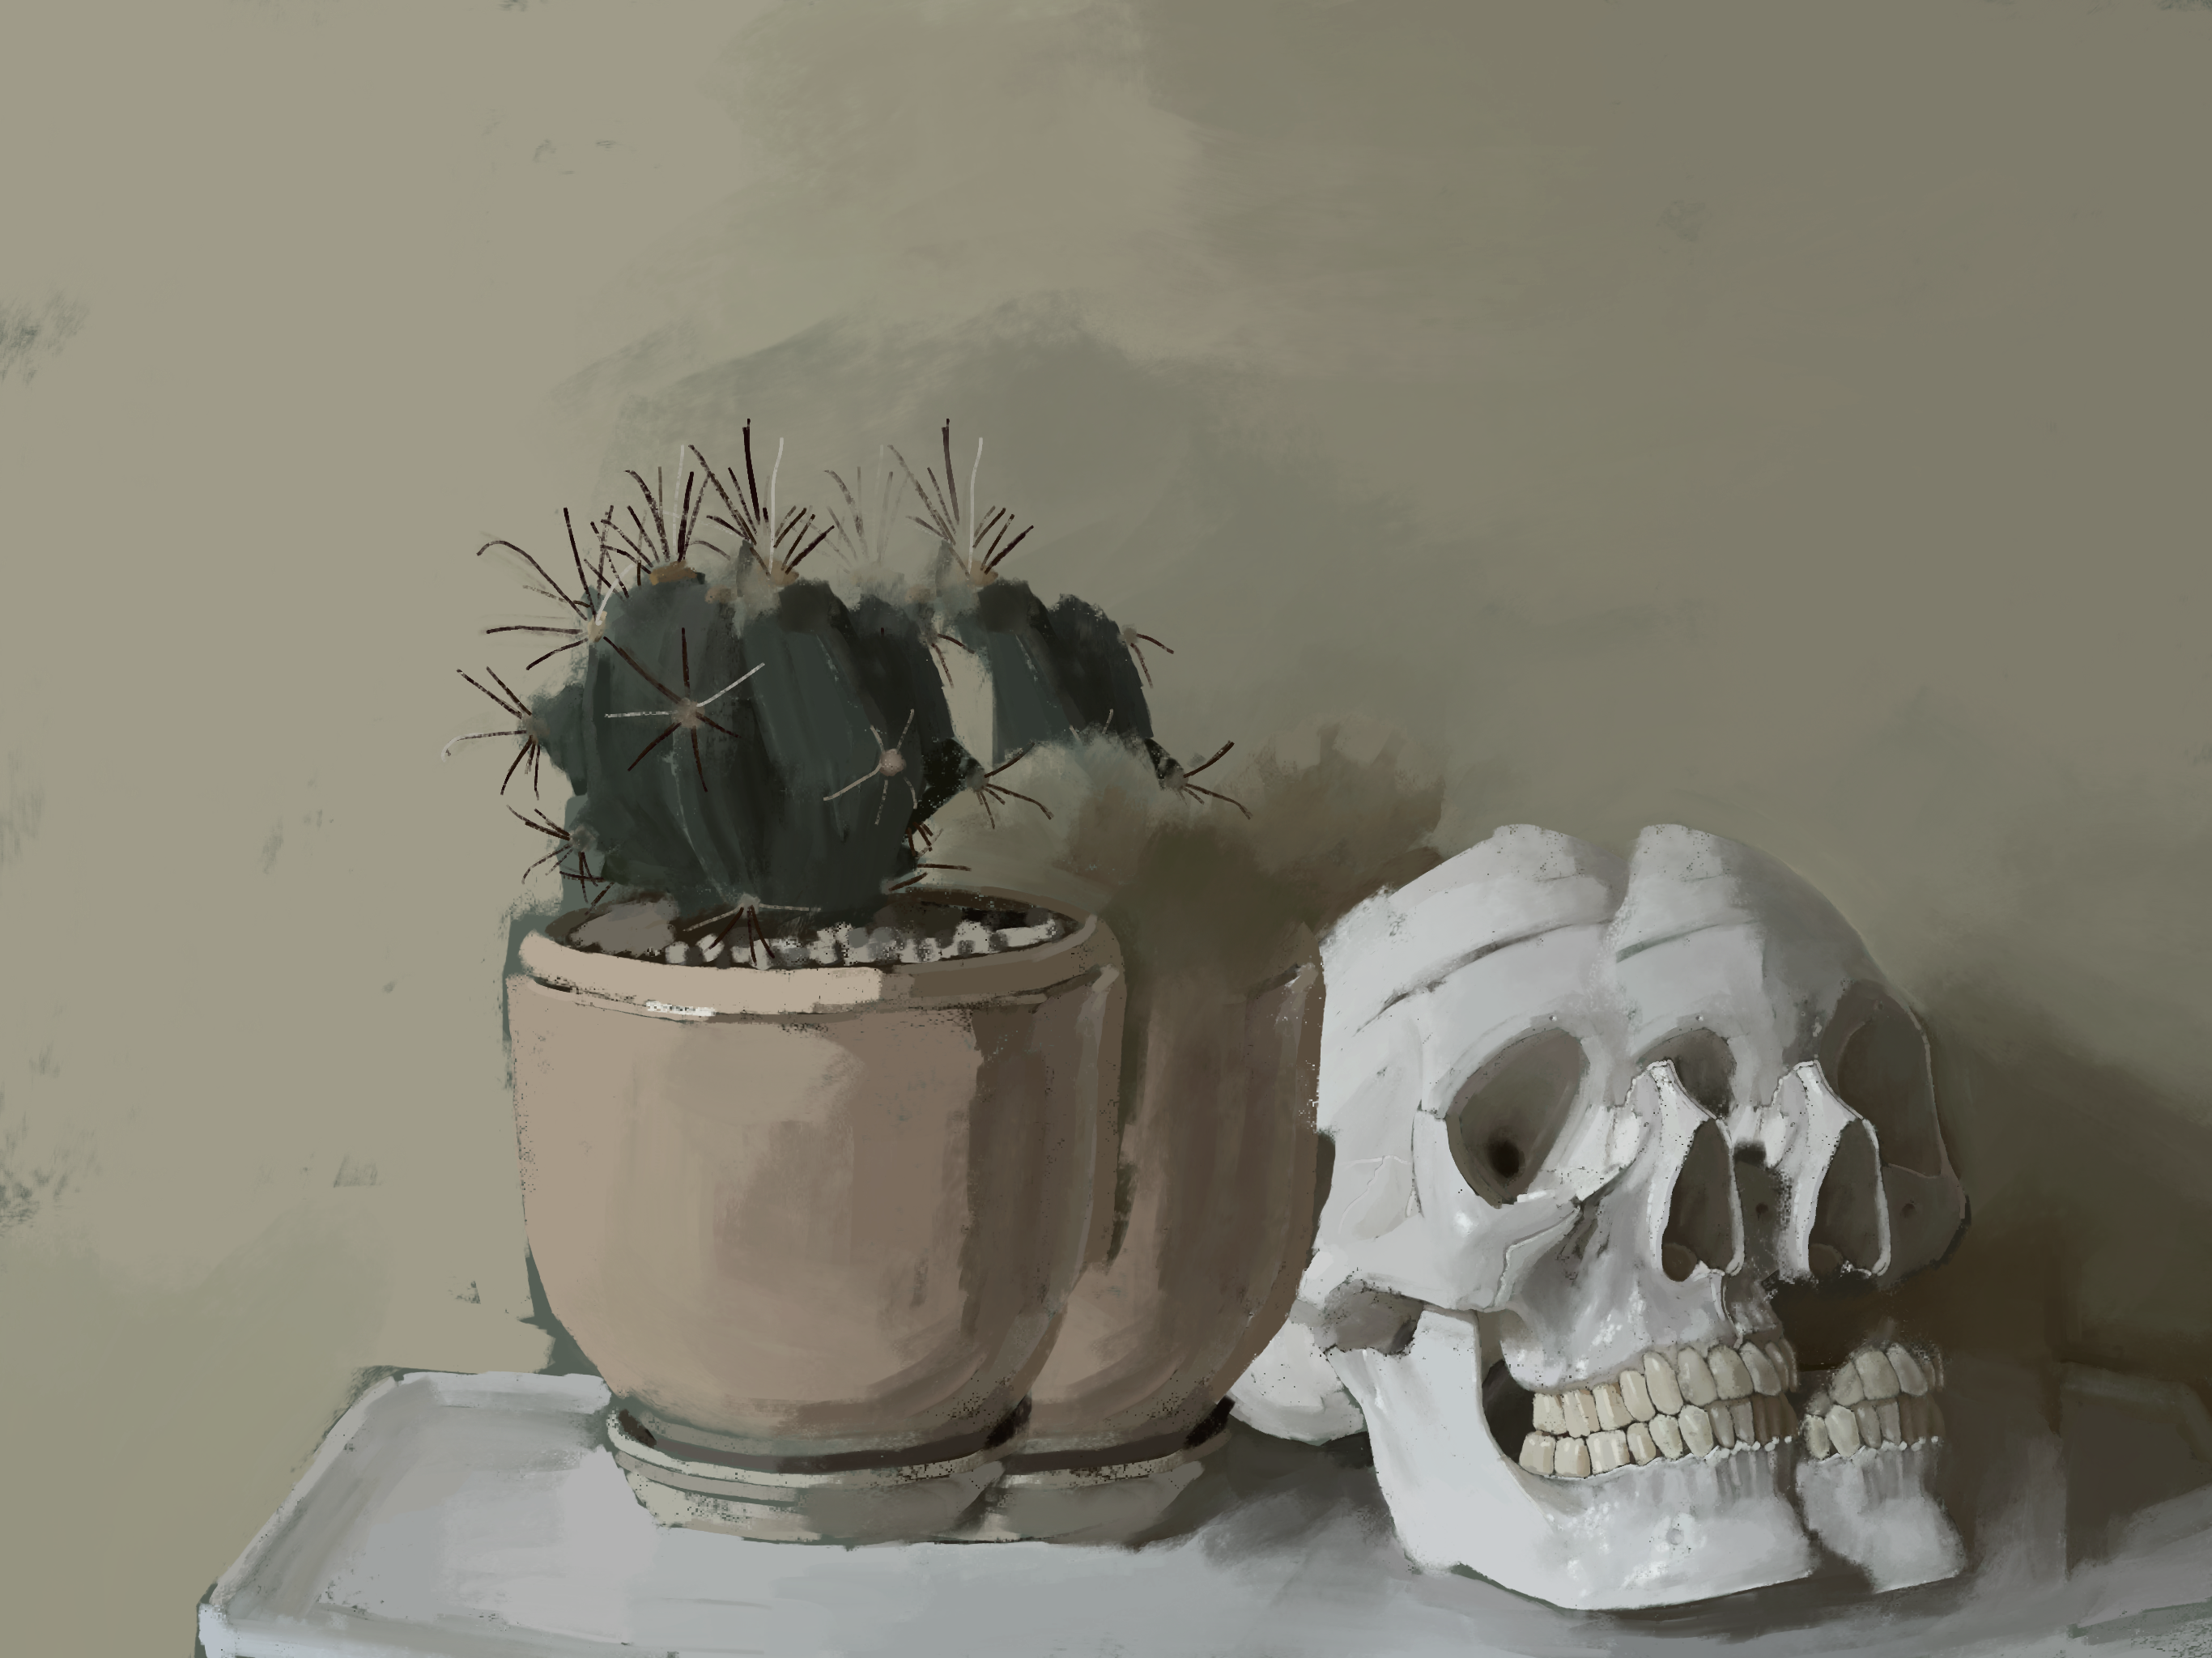 Still life of a skull and cactus on top of my toilet cause the lighting was good.